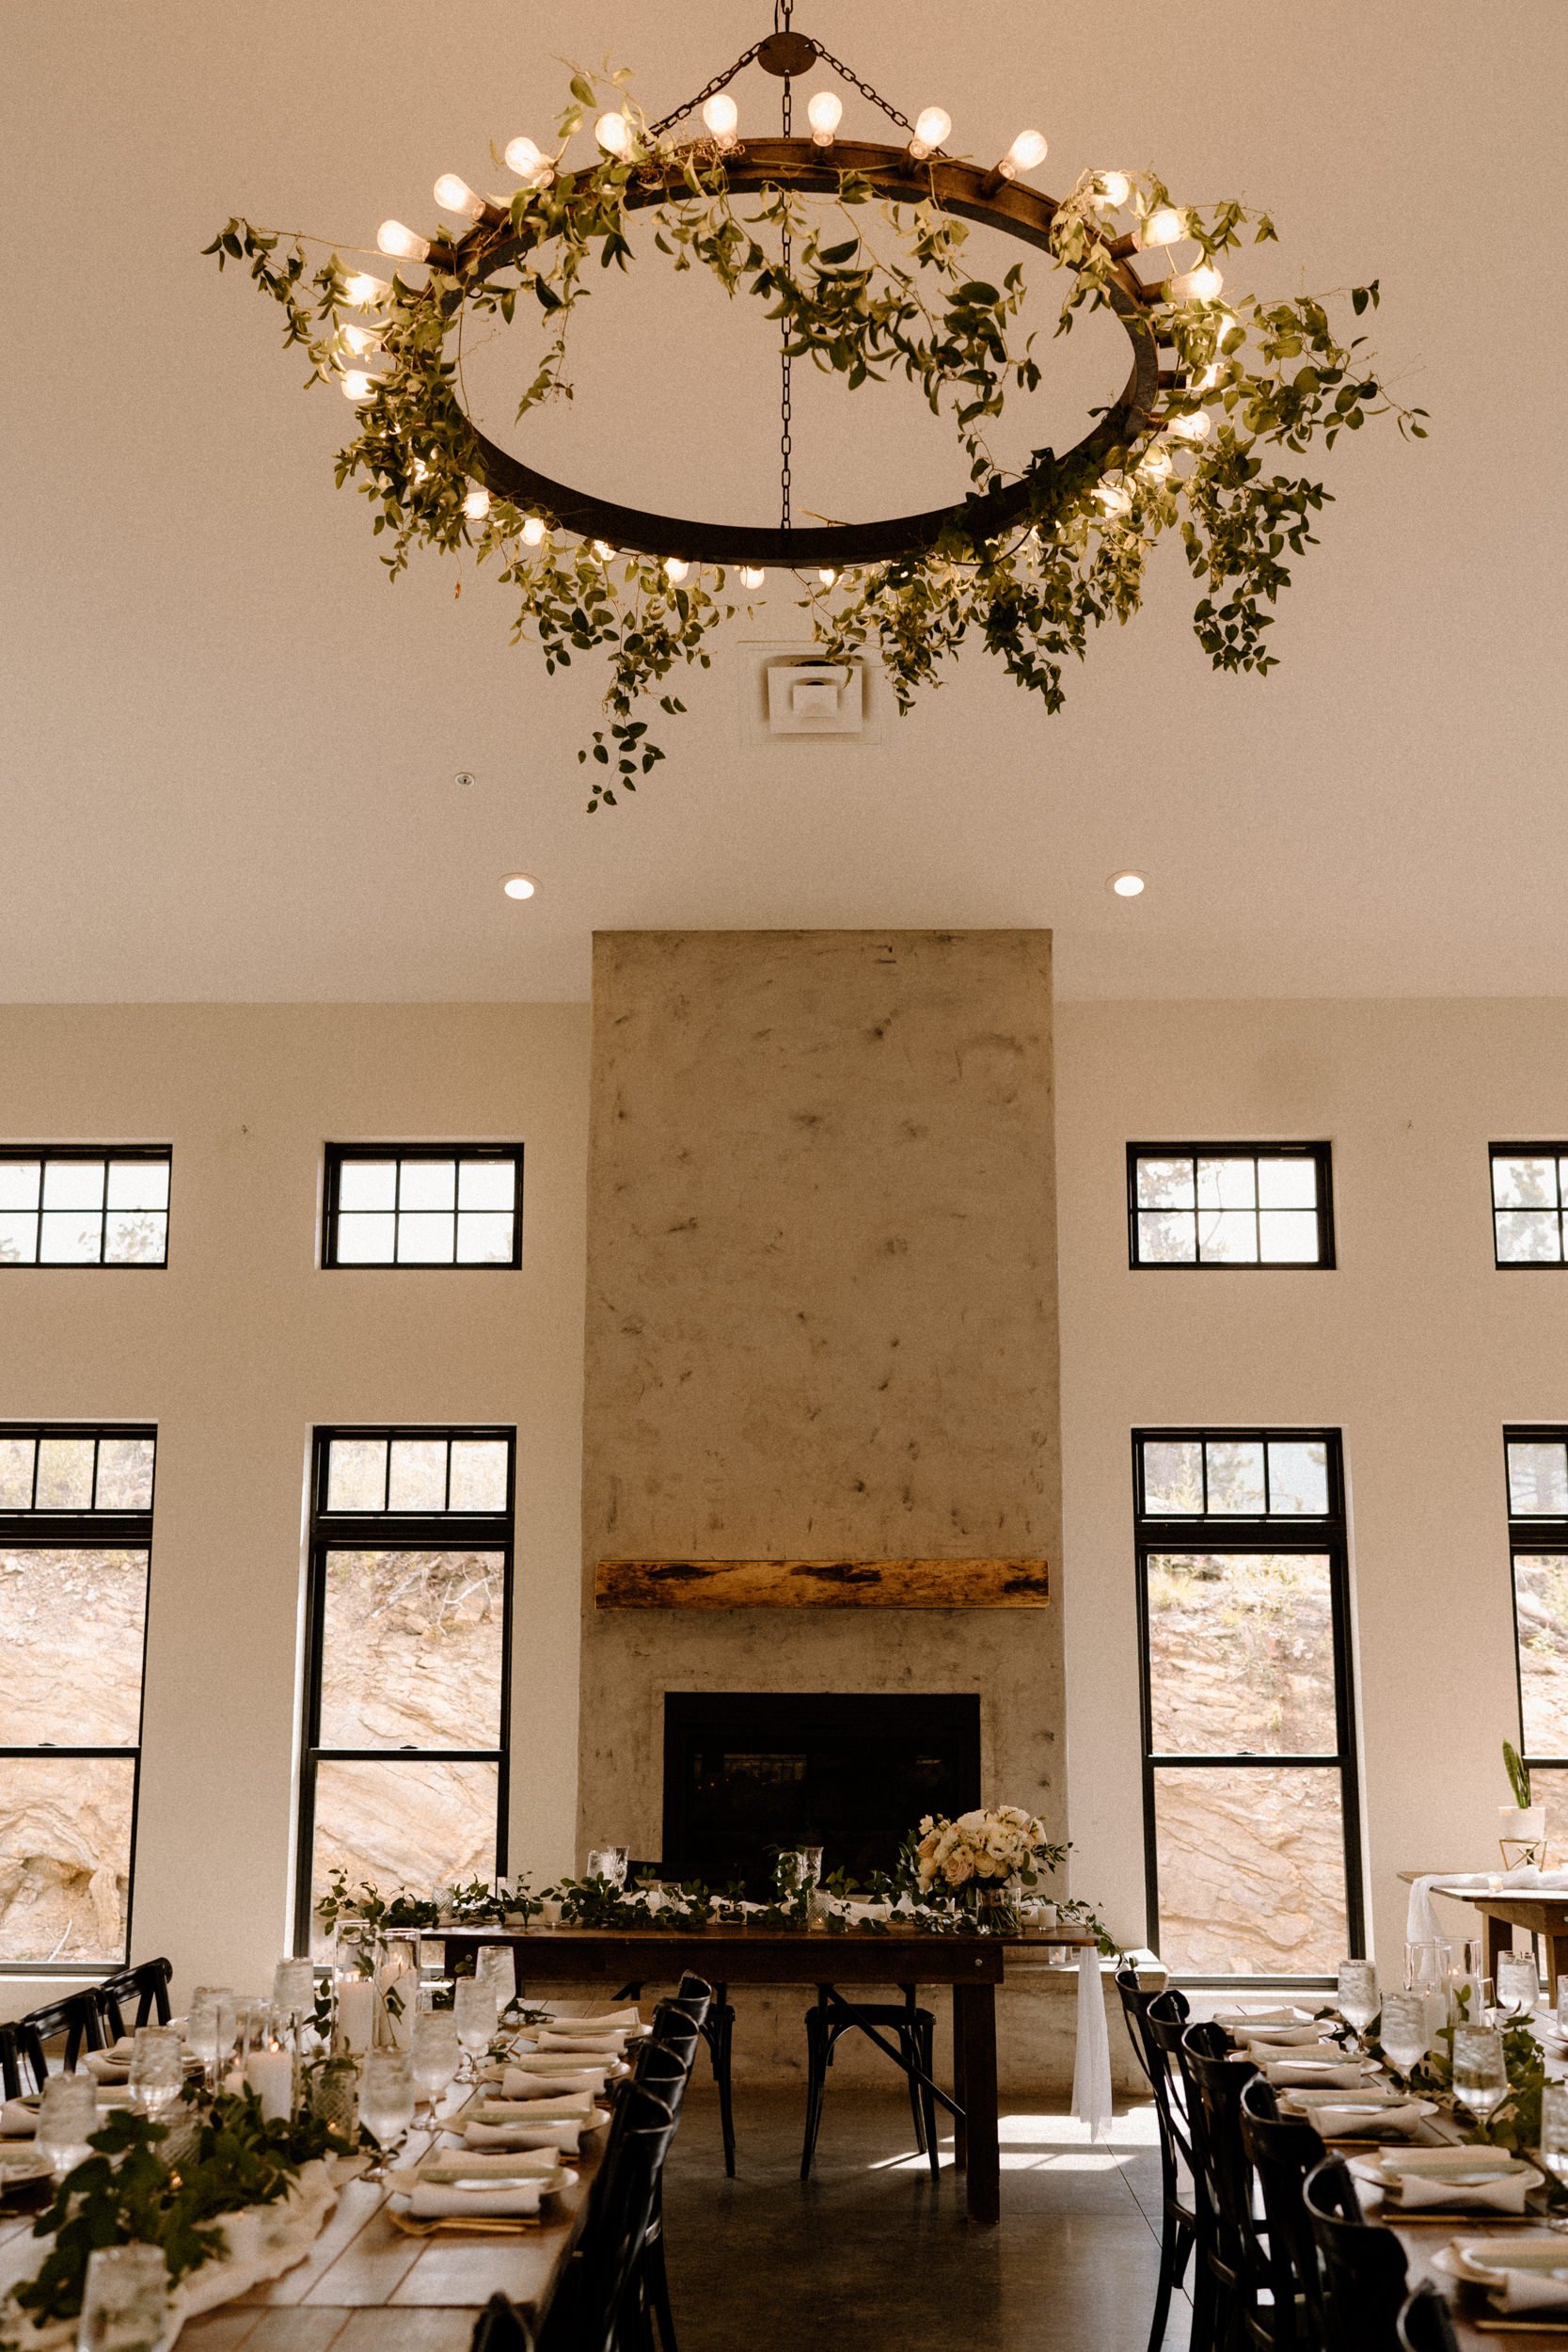 A large chandelier decorated in greenery hangs above the reception at North Star Gatherings in Idaho Springs, CO